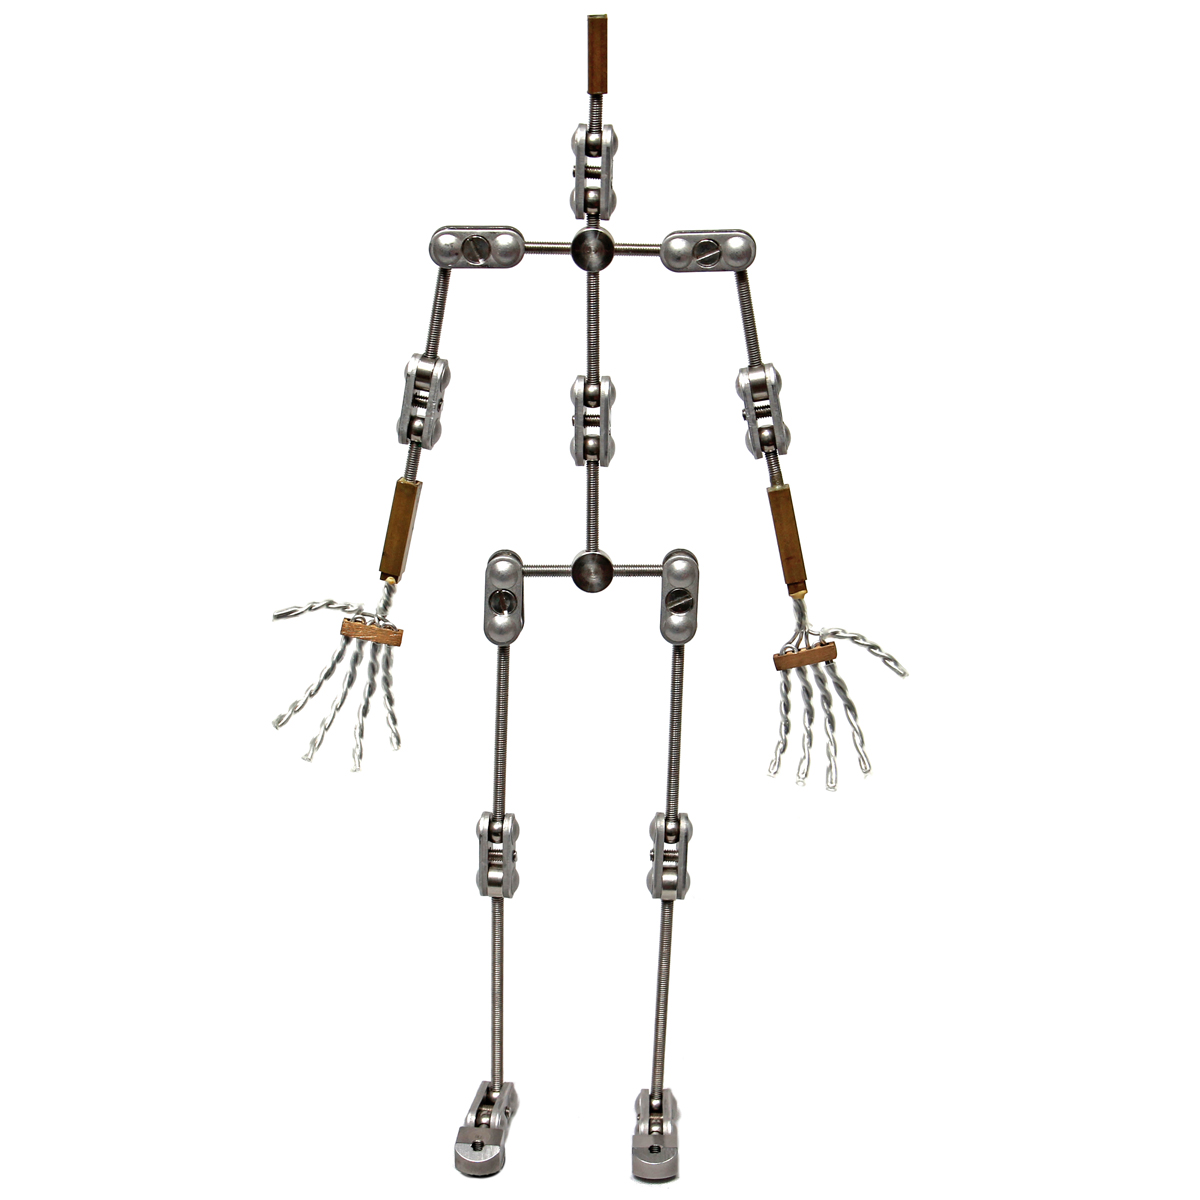 Stainless Steel Ball & Socket Stop Motion Animation Character Puppet Armature 